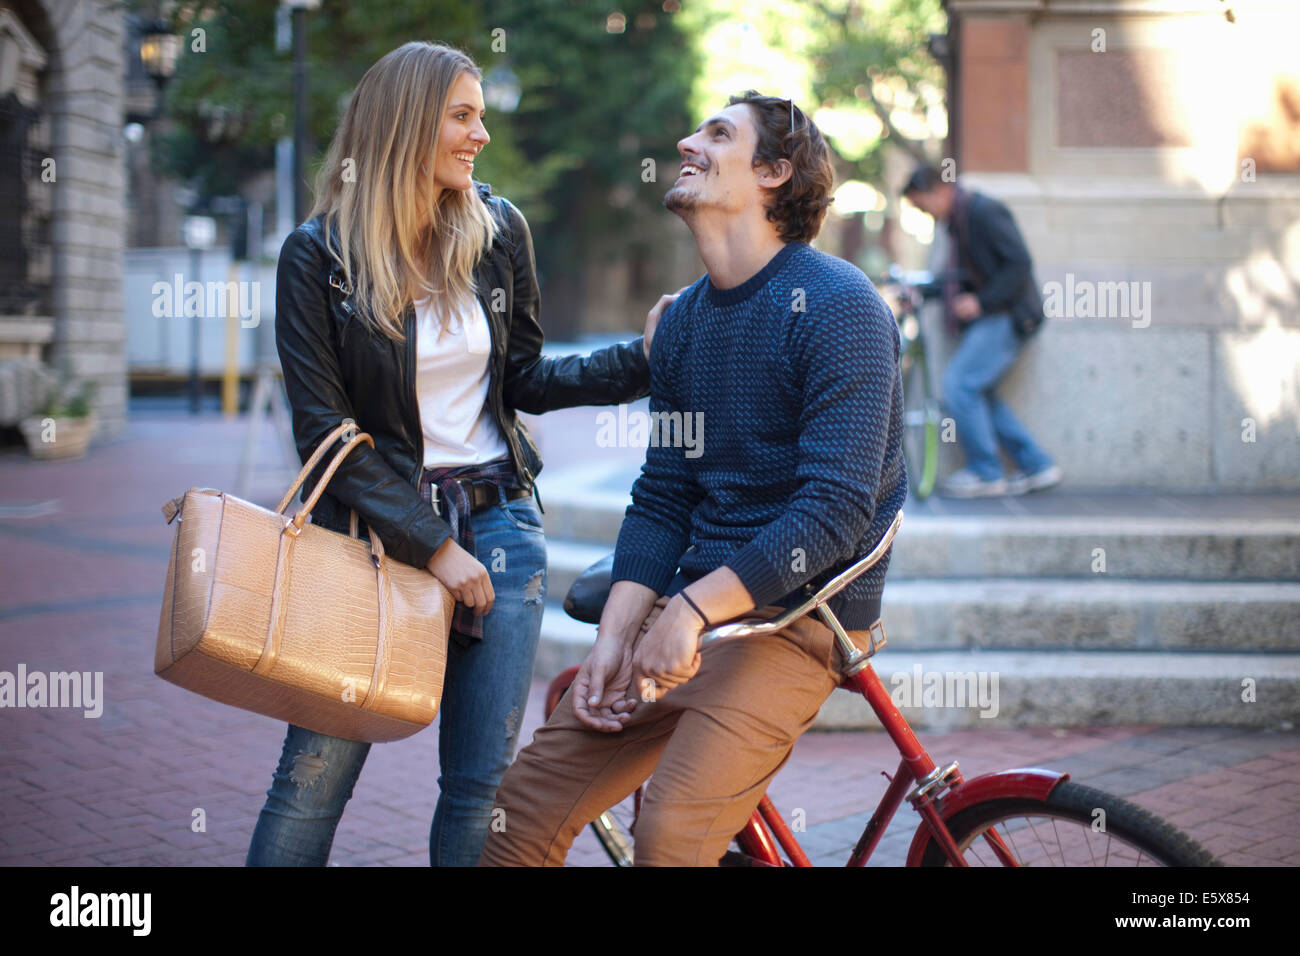 Young woman with boyfriend leaning on bicycle, Cape Town, South Africa Stock Photo